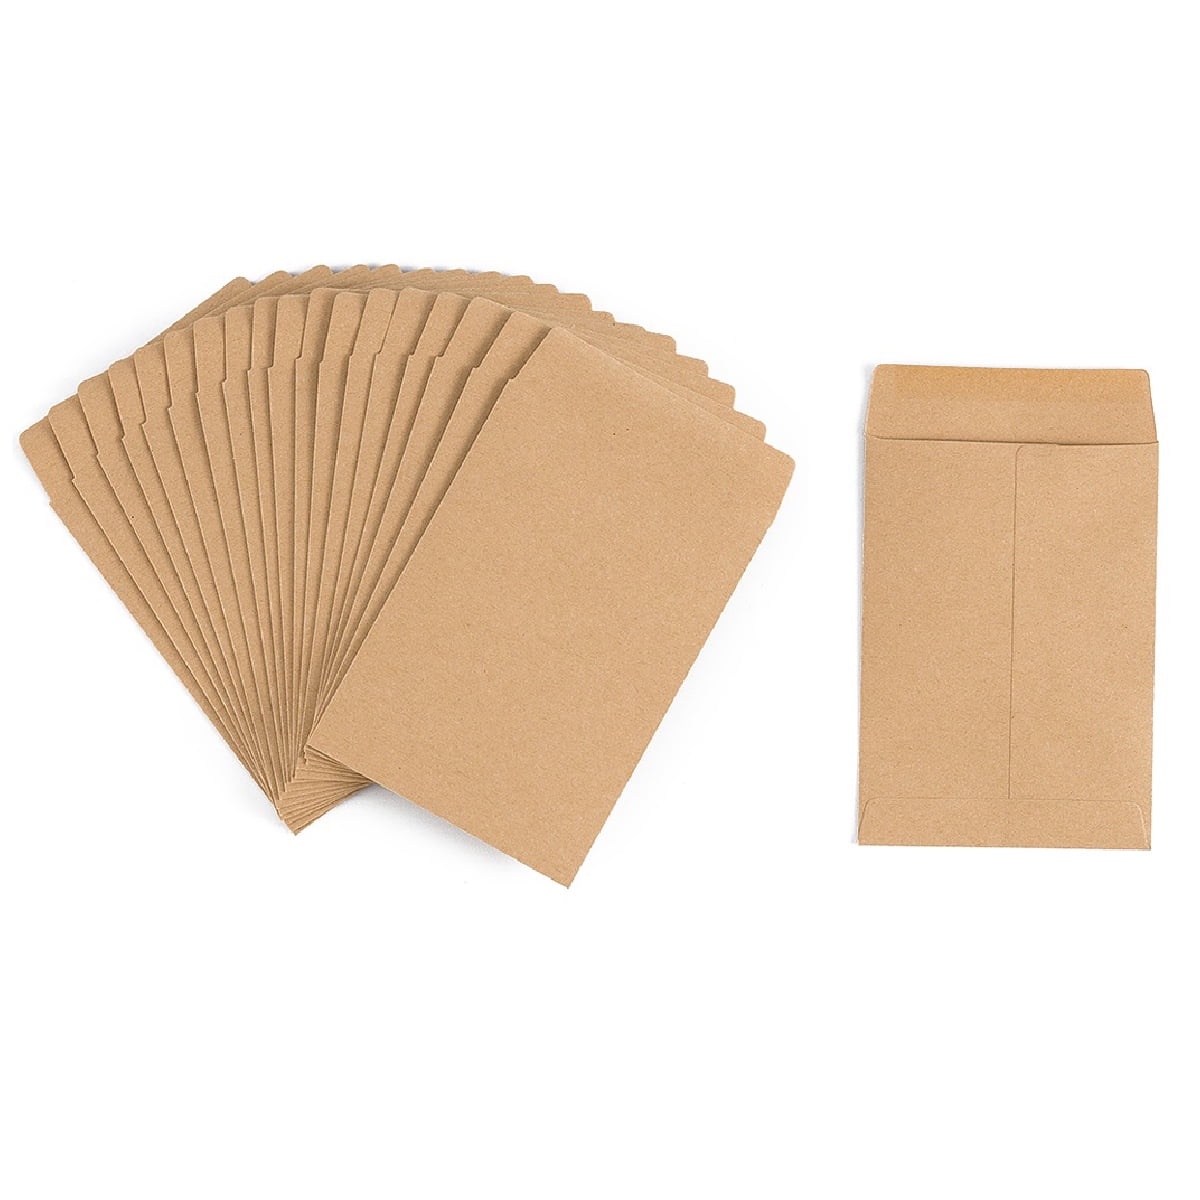 300 SMALL KRAFT COIN ENVELOPES WITH GUMMED FLAP CHANGE  SIZE 2.25 *3.5 Inch 